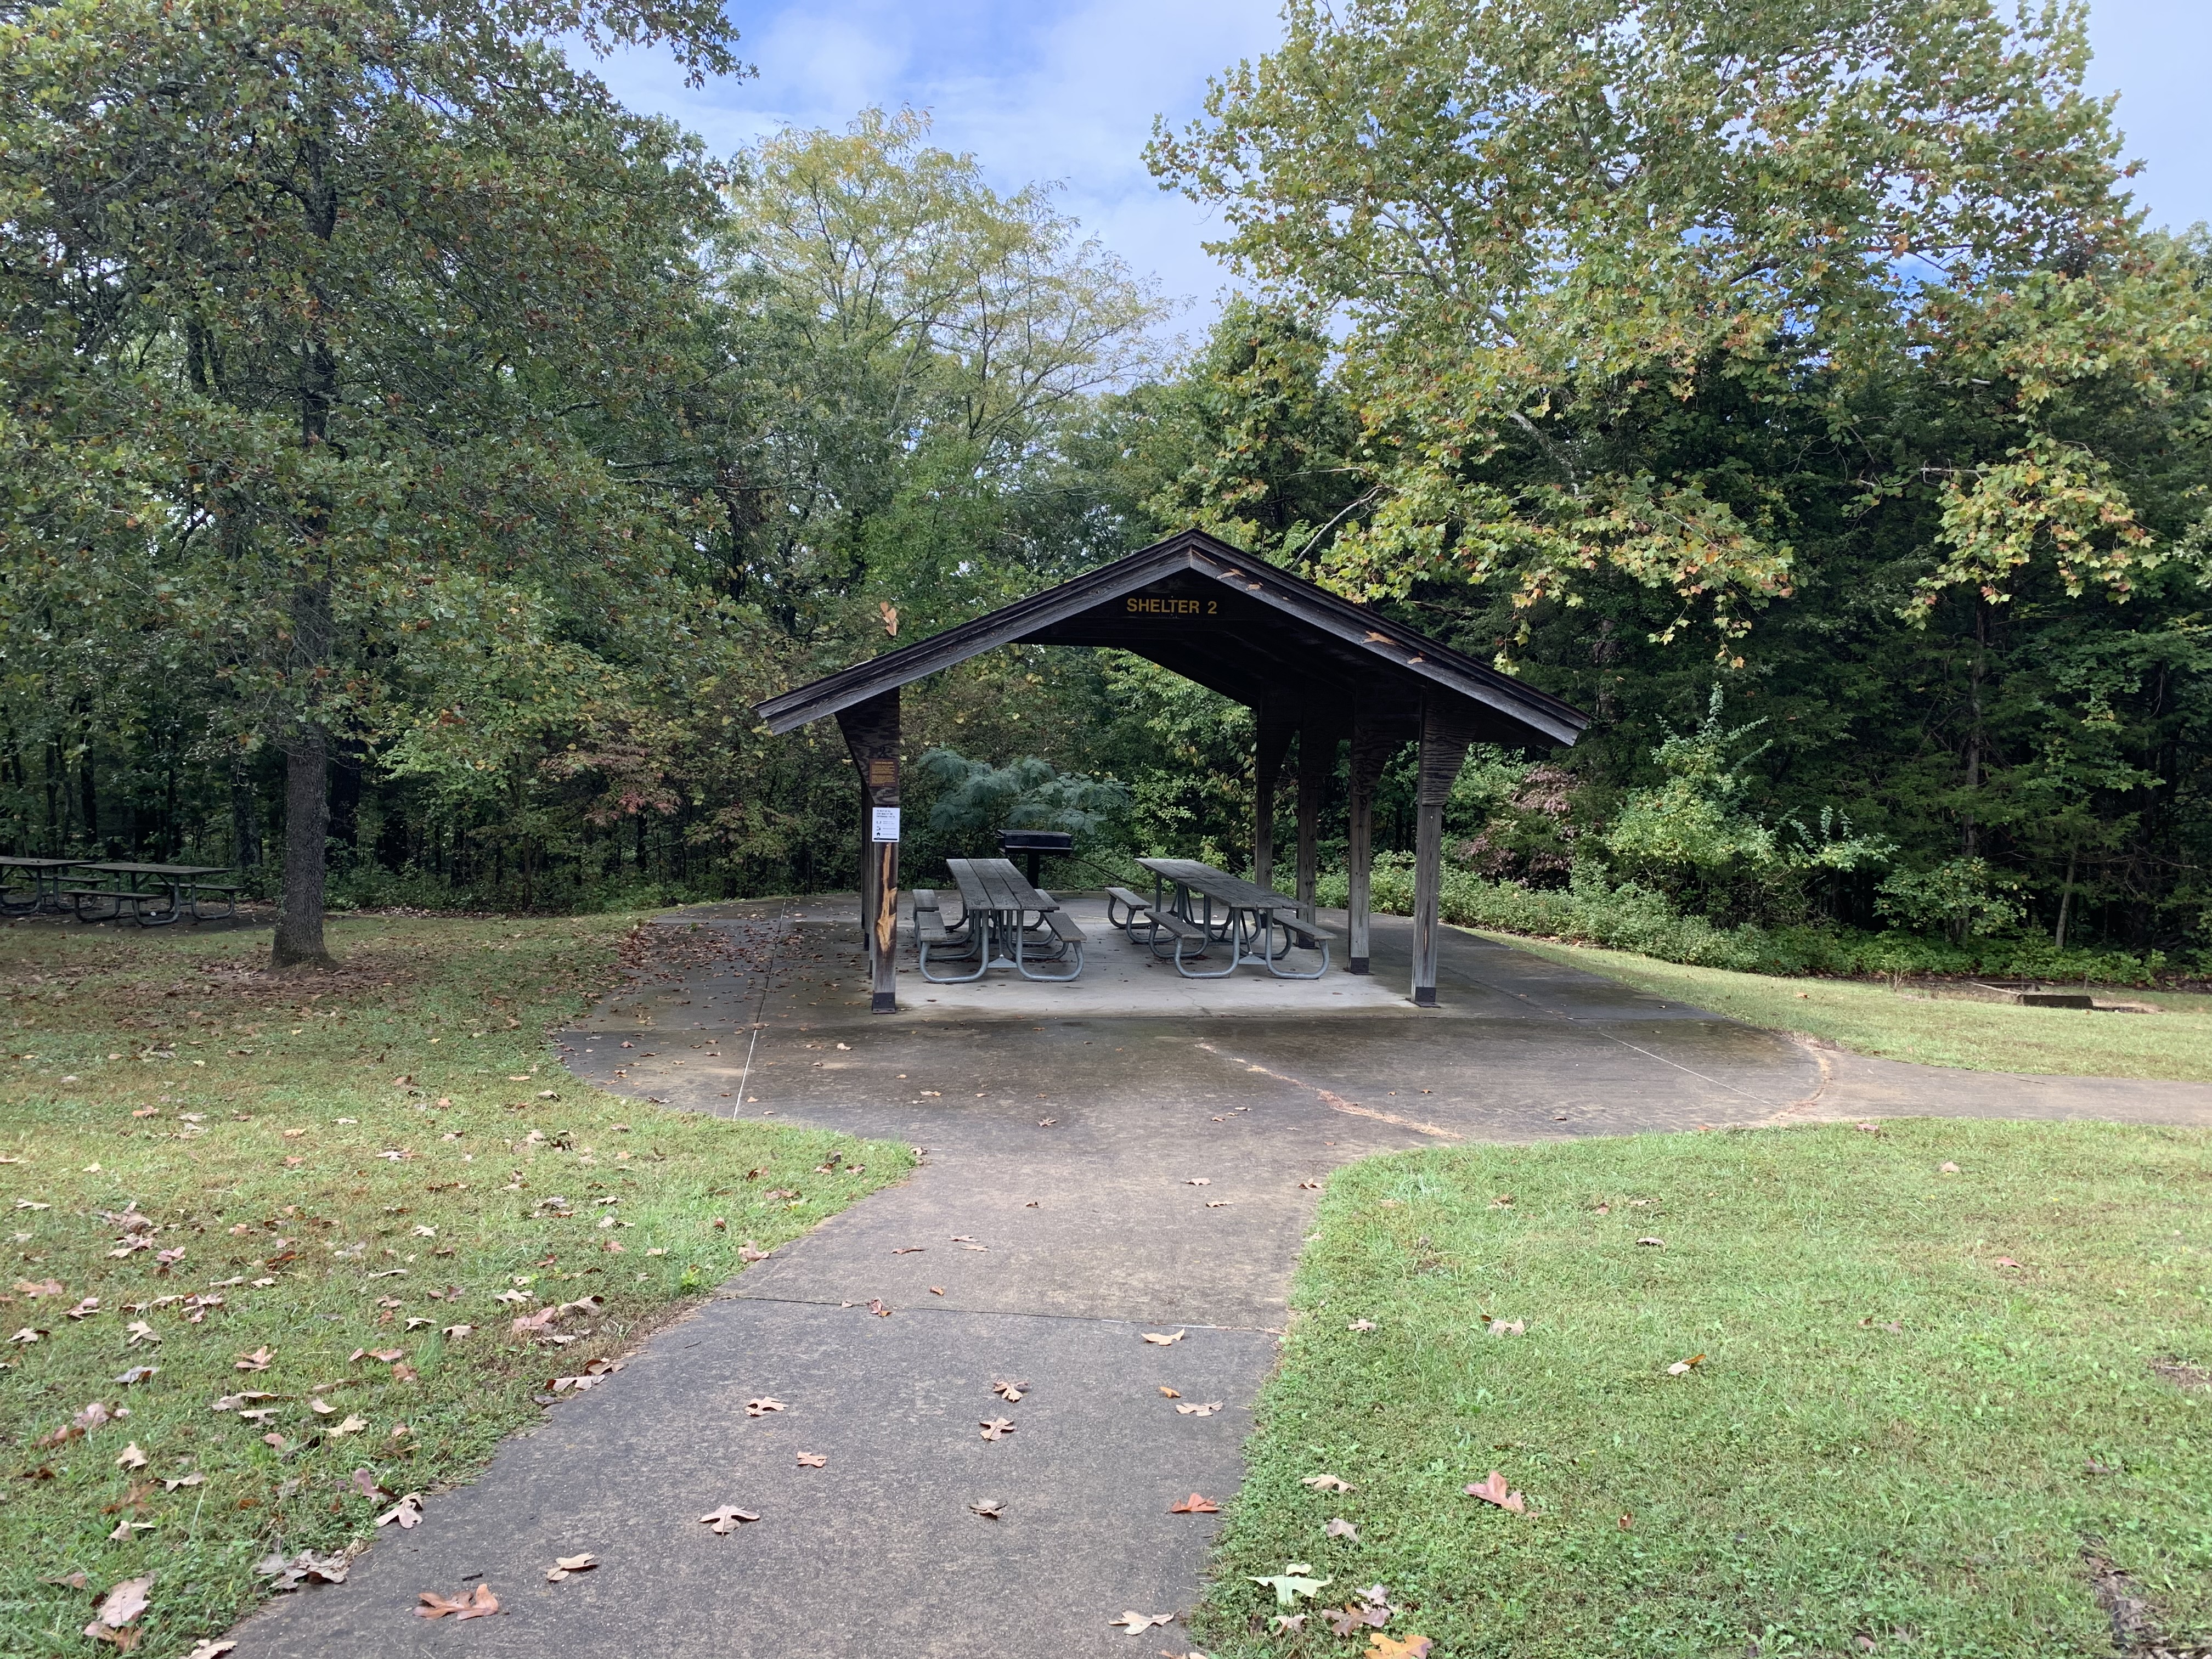 Open picnic table with concrete path leading to it and grill and background